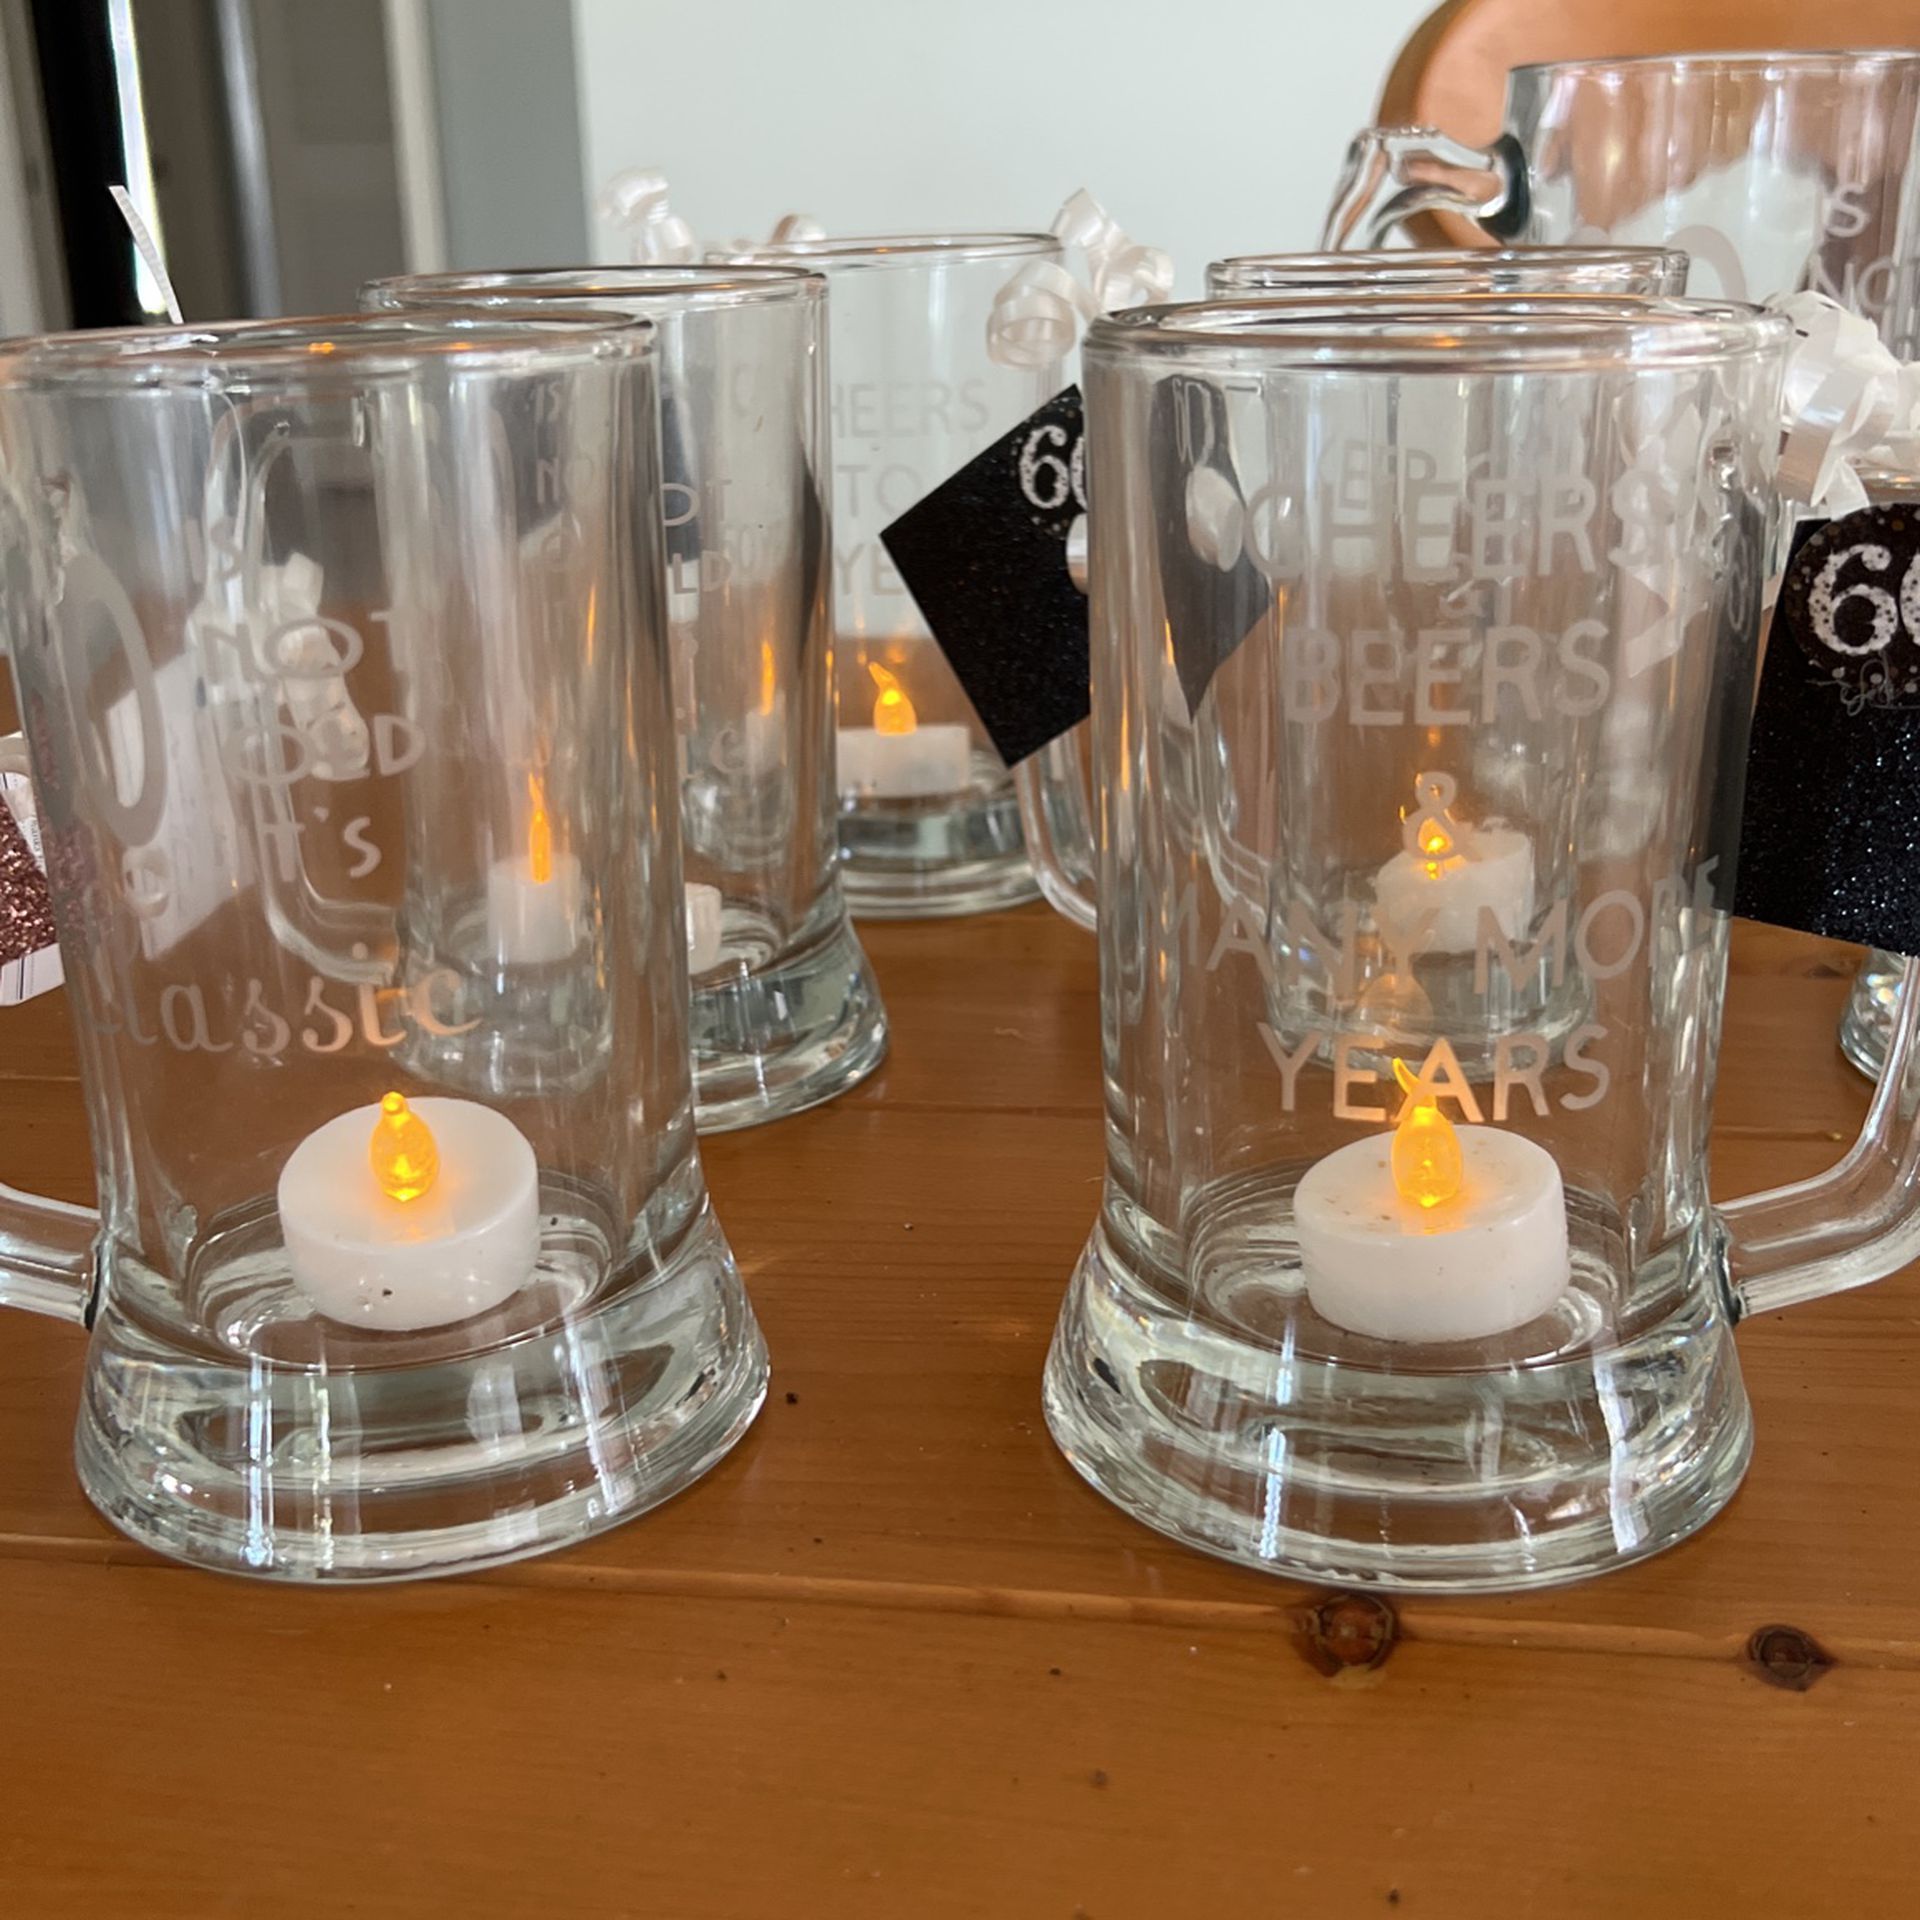 Turning 60 Years Old Birthday Mugs (14) W/ Cards And Candles 